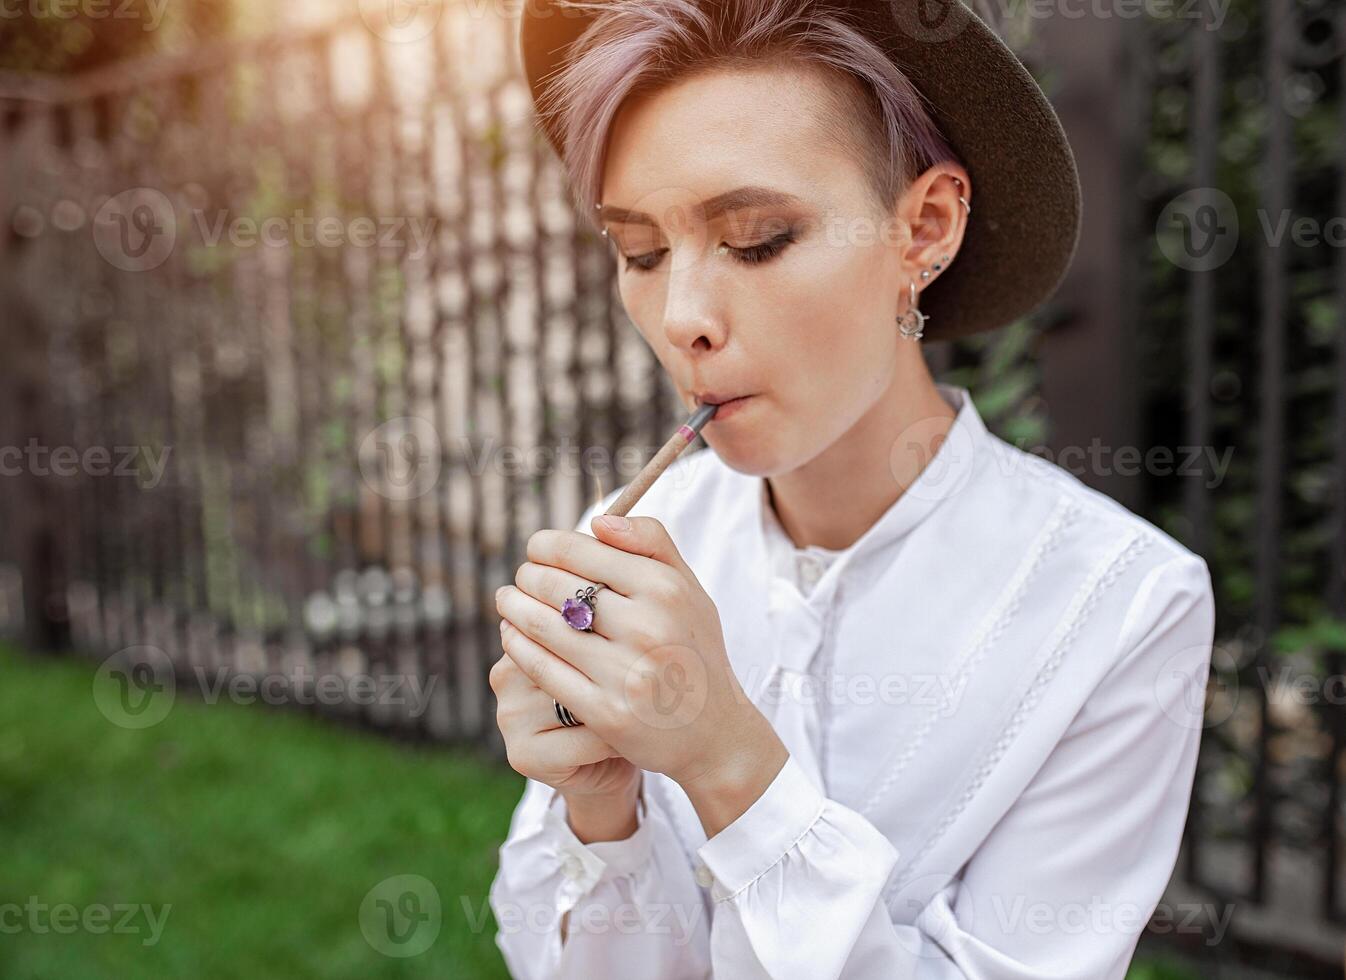 Young stylish hipster woman wearing the hat standing near the fence and smoking a cigarette in the city photo